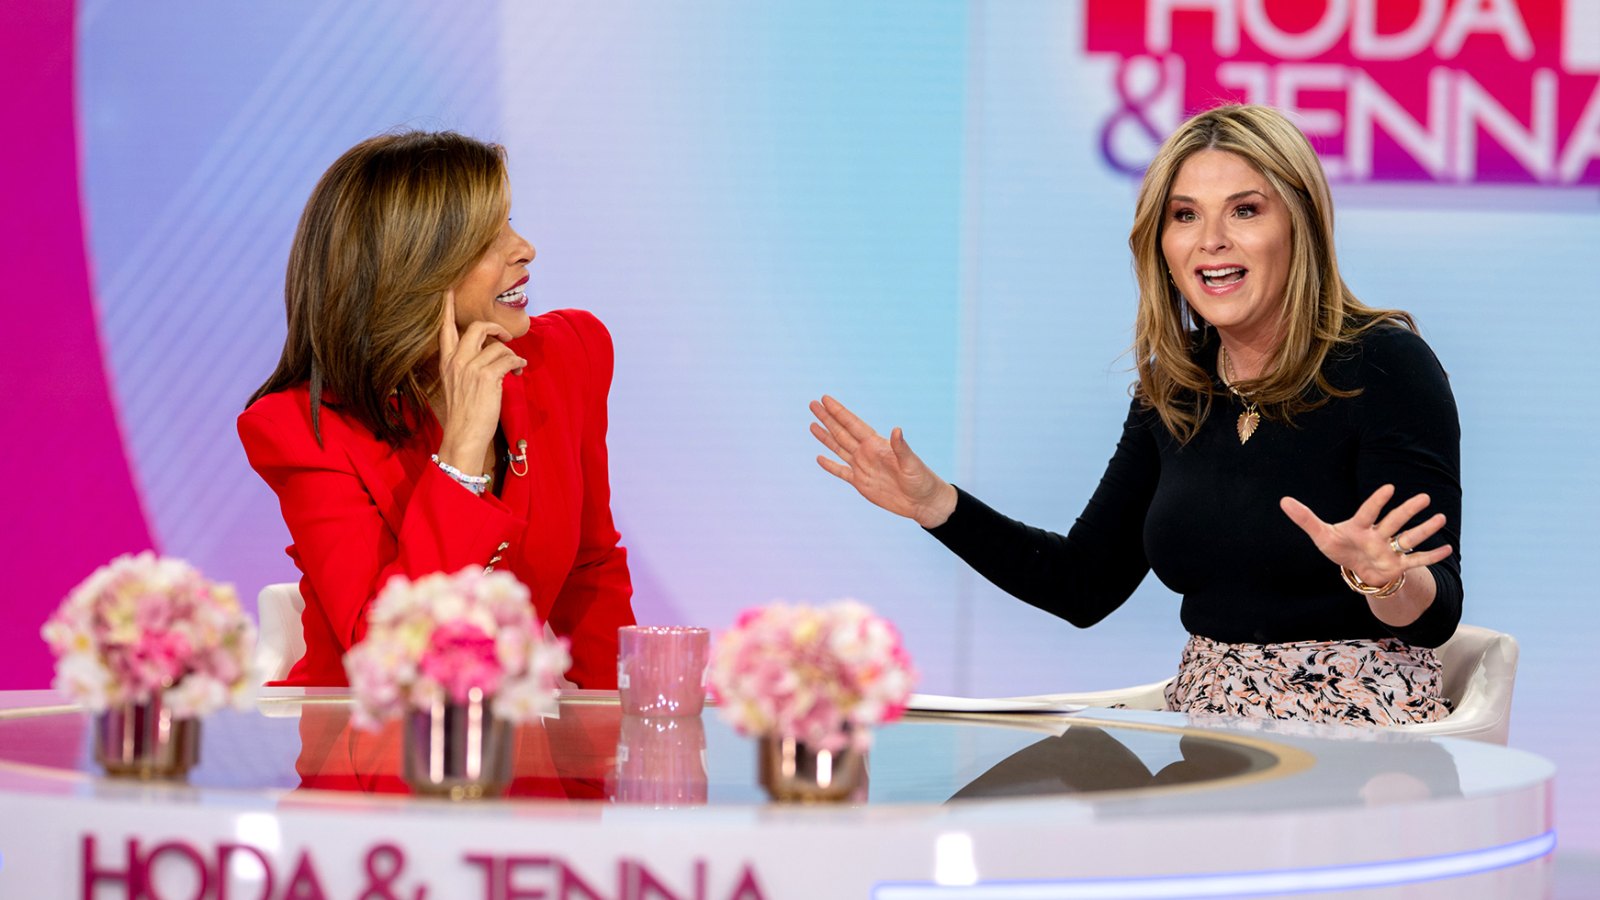 Jenna Bush Hager’s Son Has Hilarious Reaction to Seeing His Mom on TV